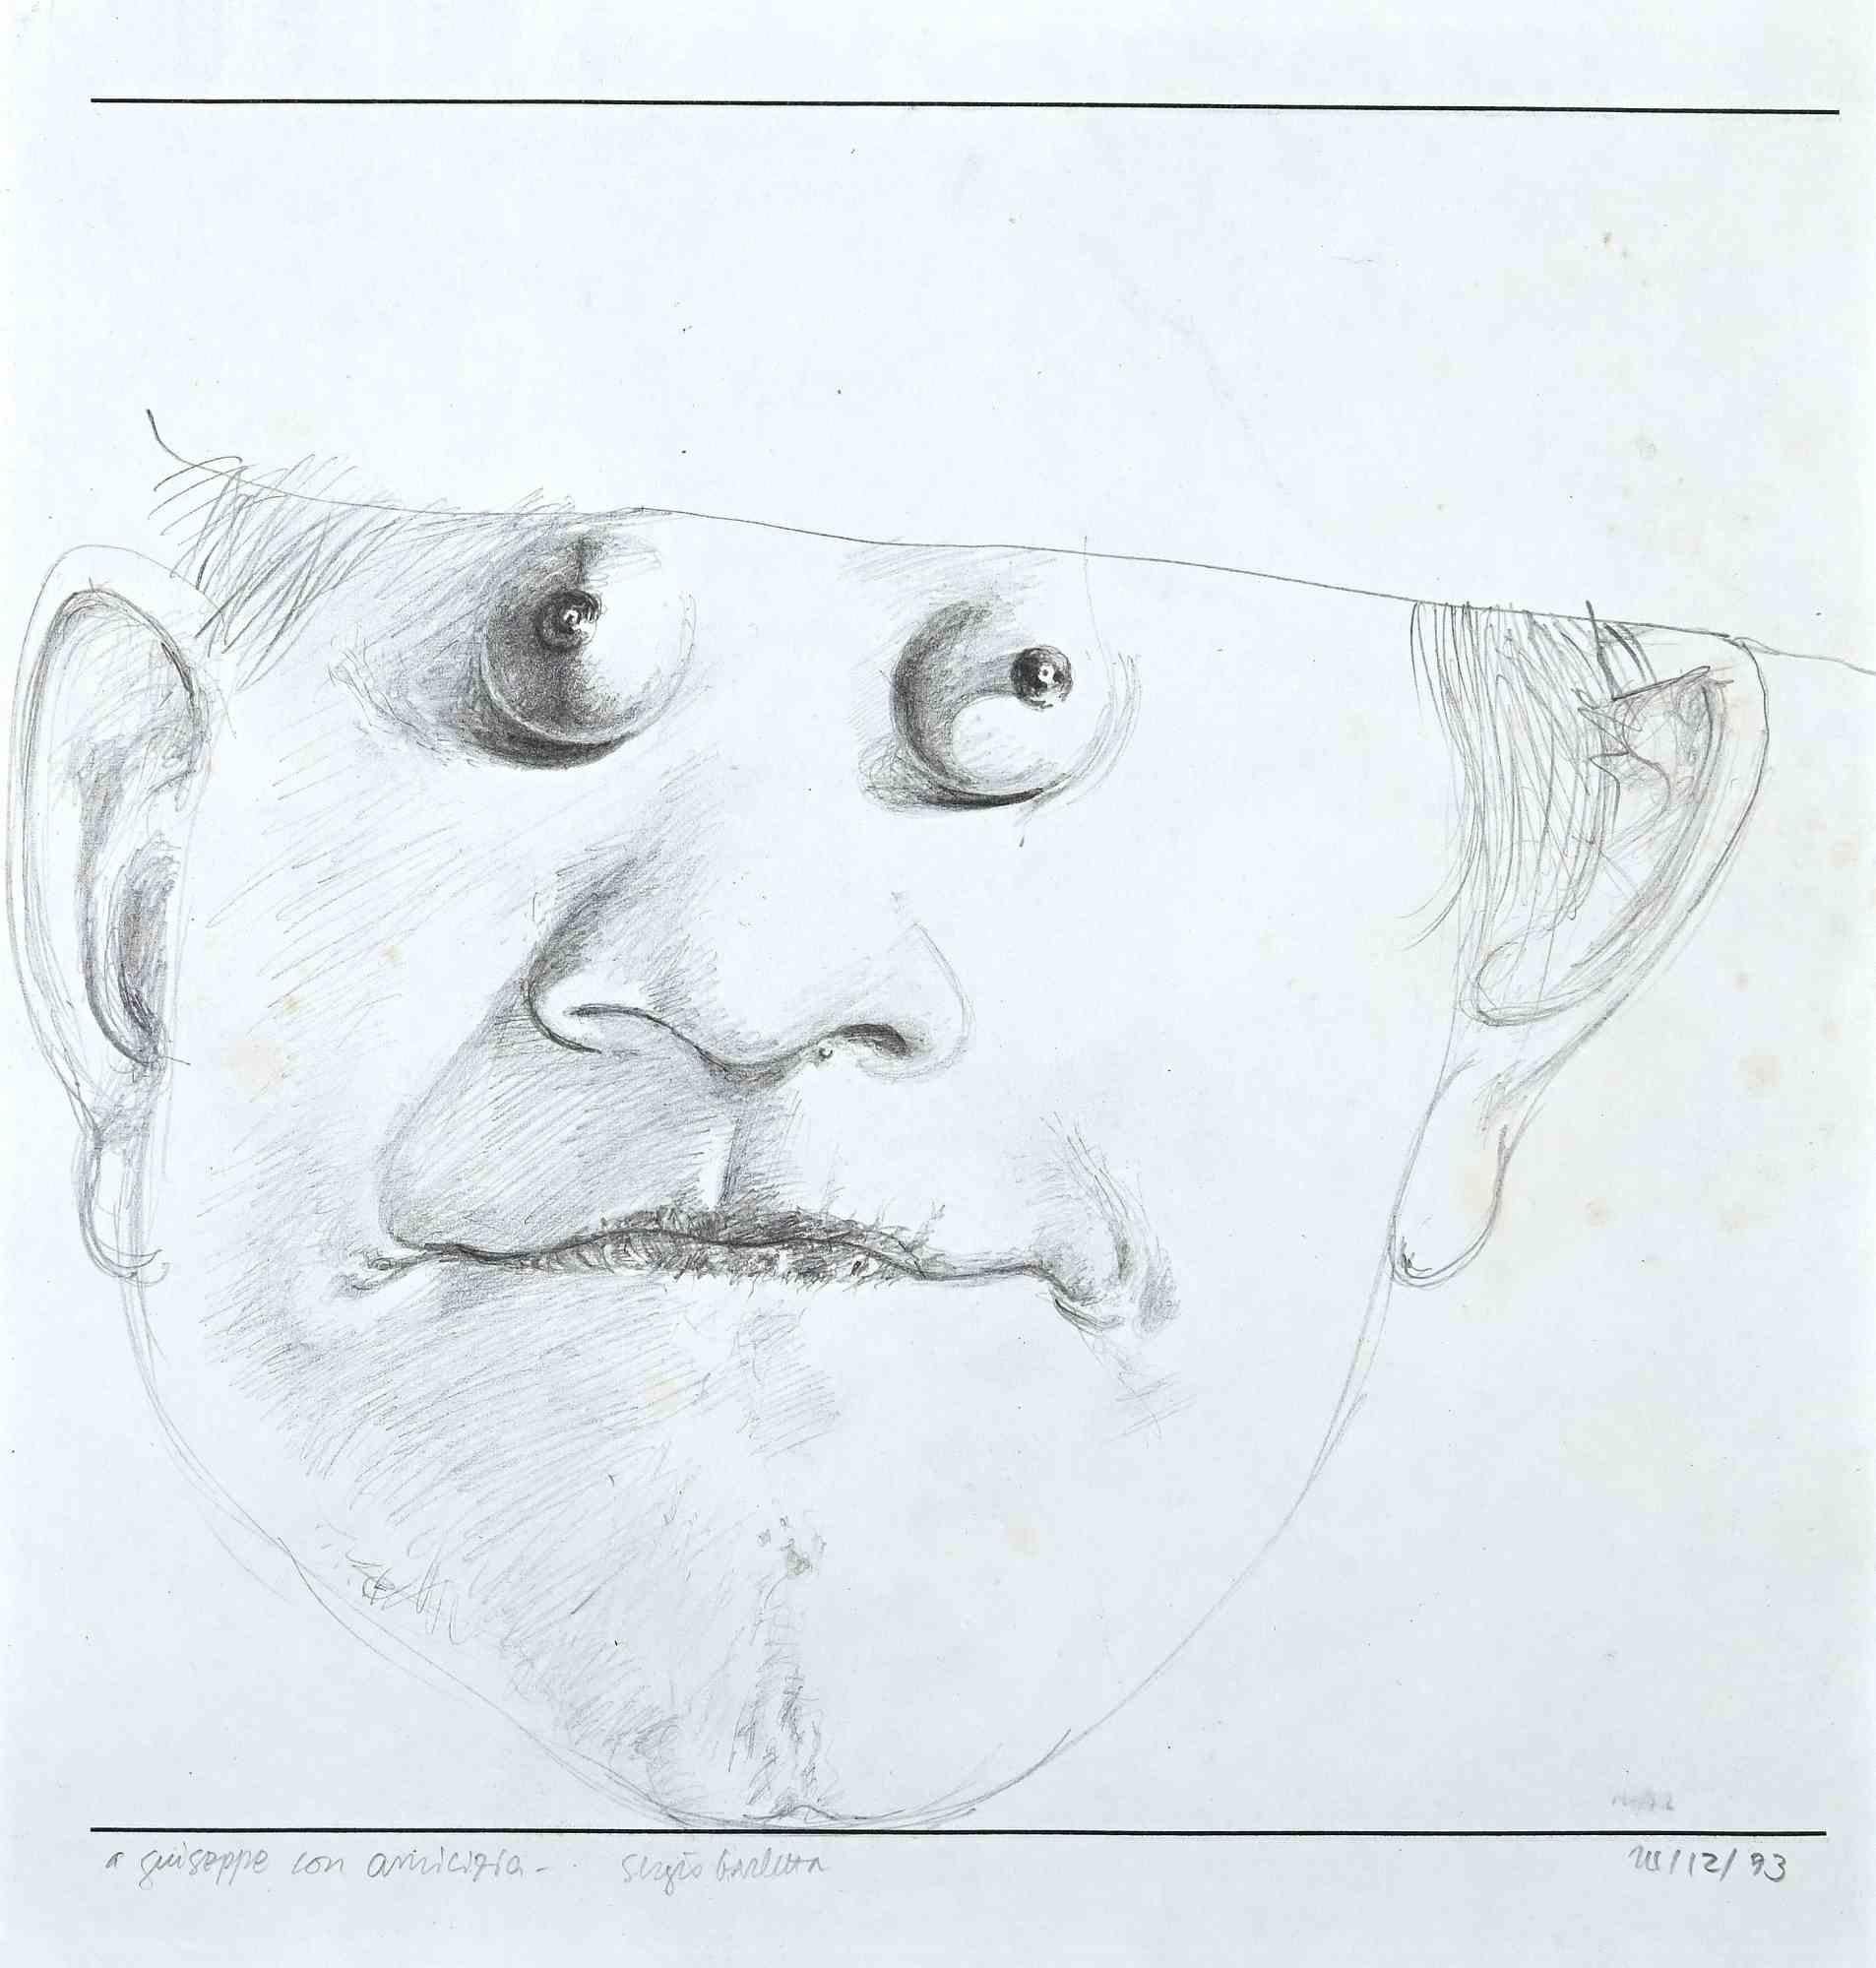 Portrait is an original pencil drawing on paper realized by Sergio Barletta in the 1993s.

In good conditions.

This artwork represents a portrait of a man. At the bottom along the margins there is a dedication: To Giuseppe with